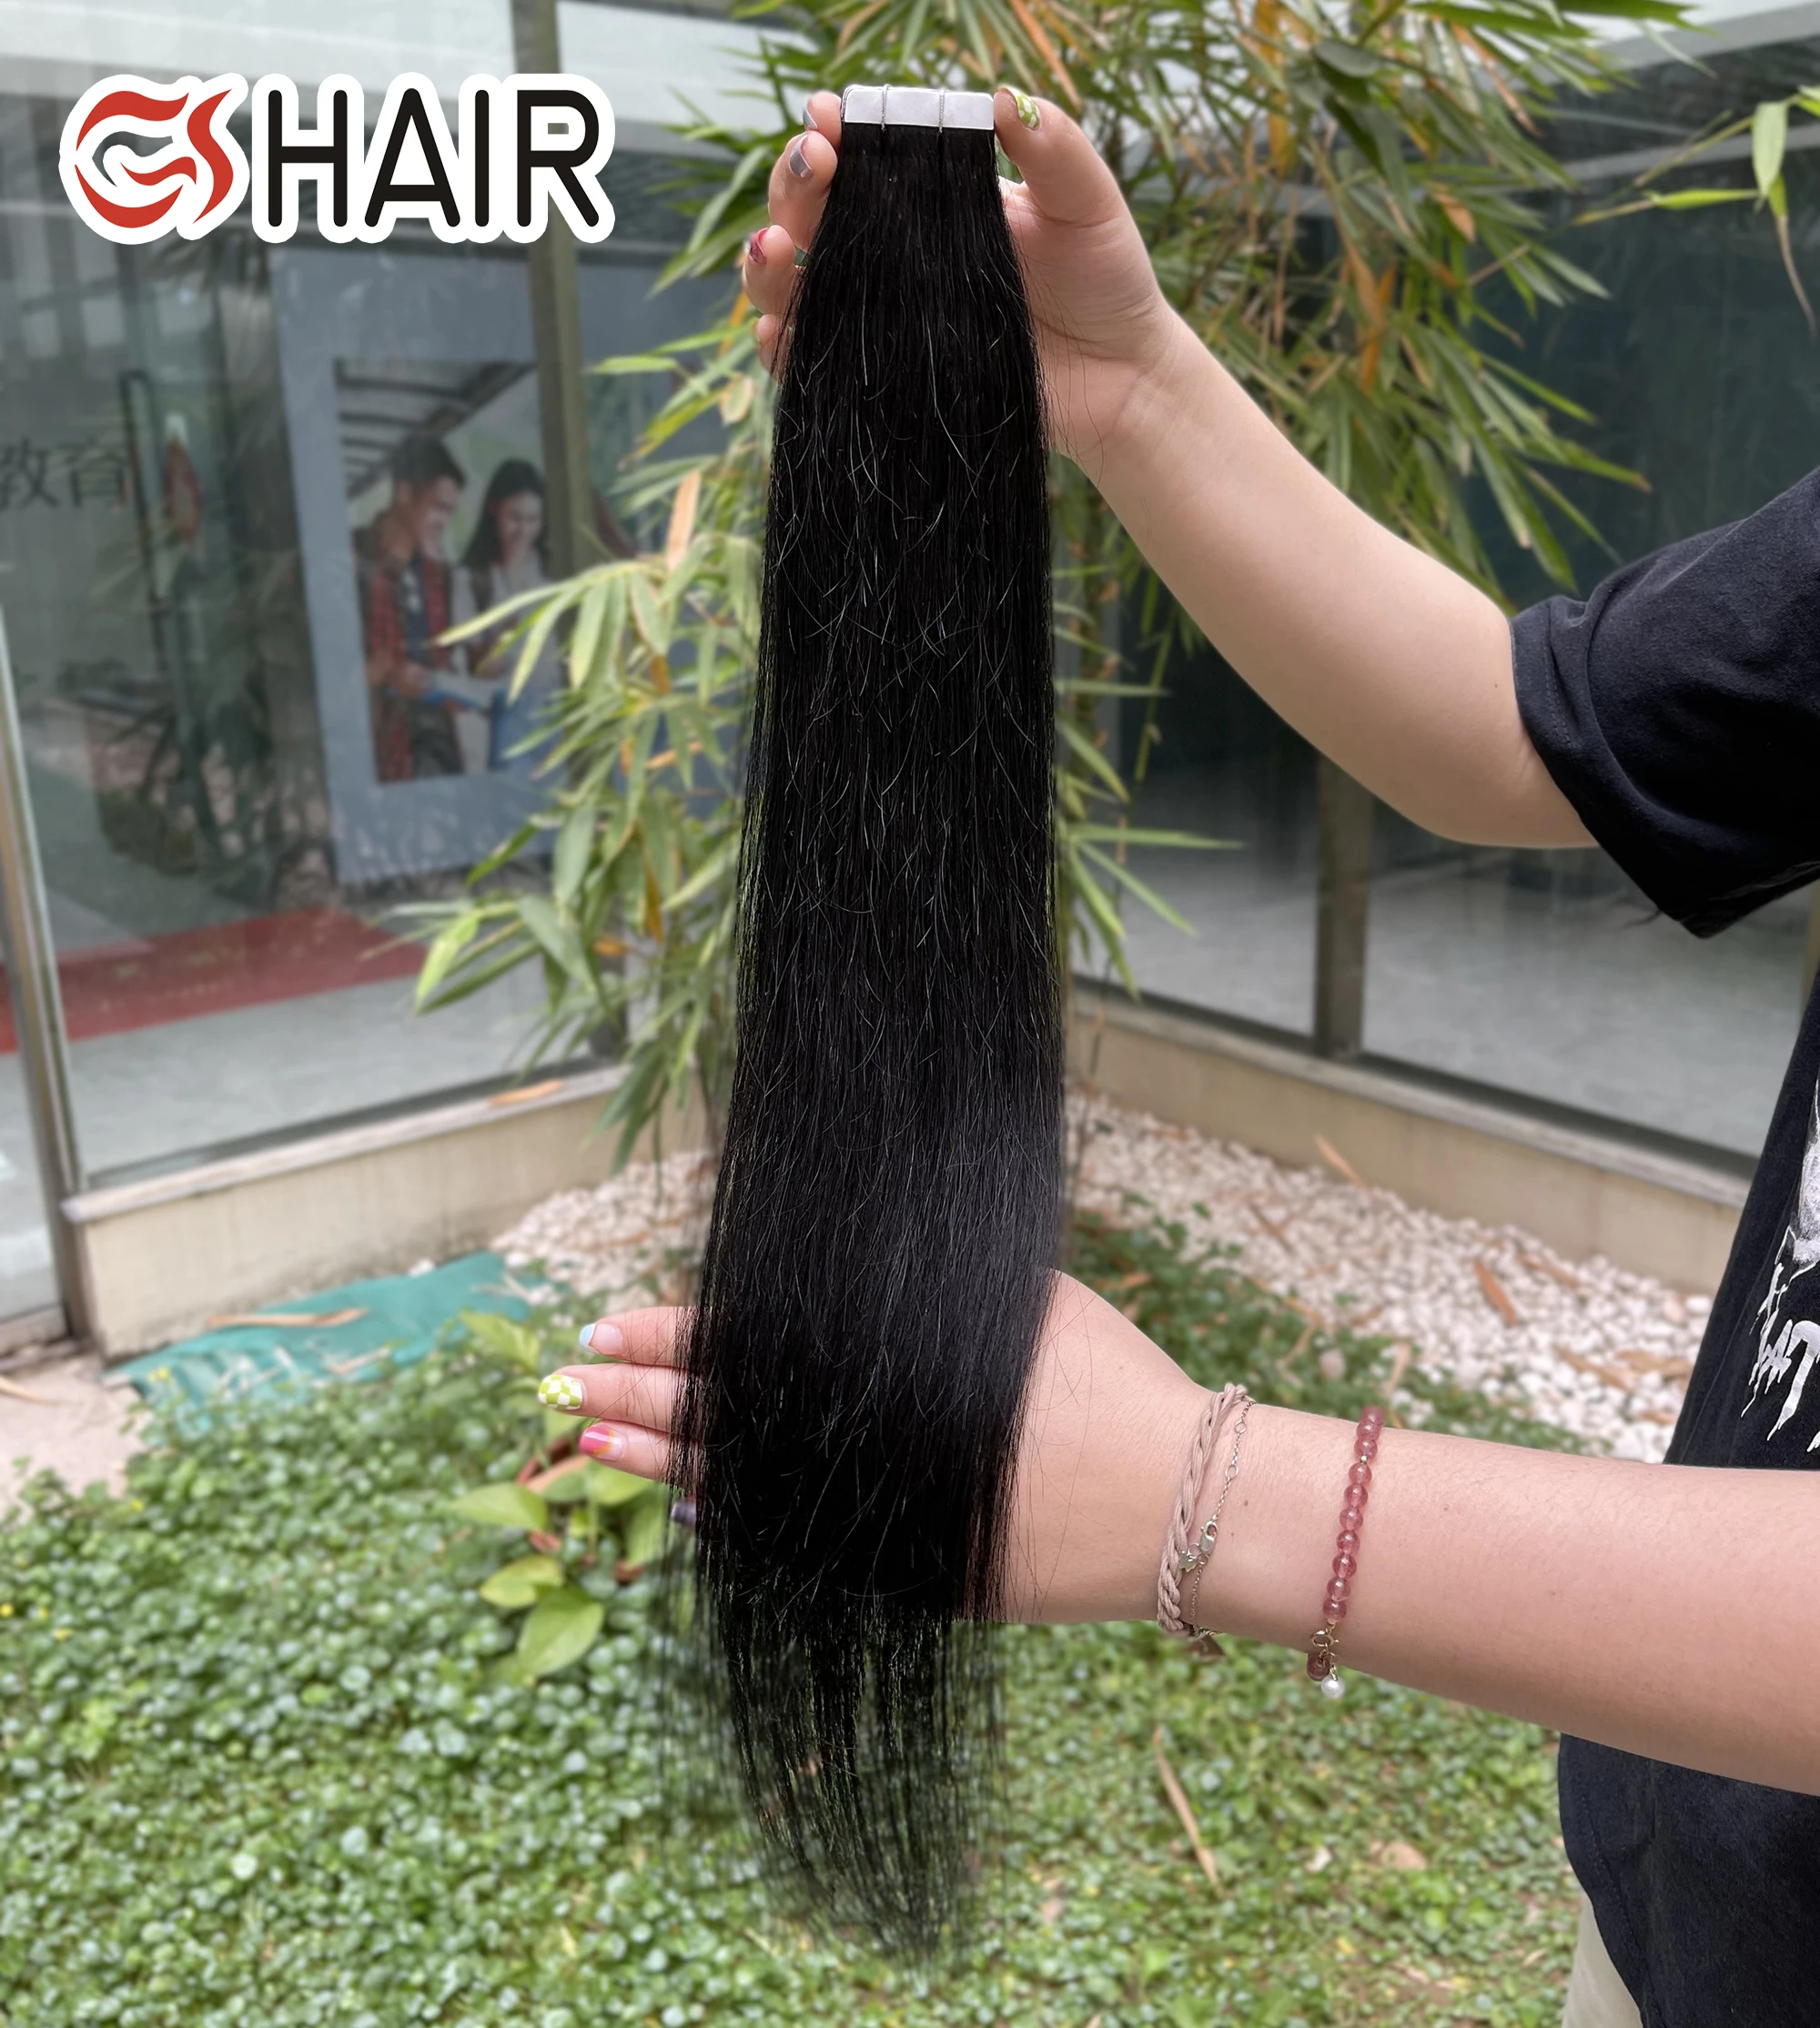 

Wholesale Double Drawn russian Skin Weft Tape Ins Extensions, GShair 100% European Hair invisible Tape In Human Hair Extension, 1# #1b #2 #4 #6 #8 #10 #16 #18 #99j #27 #24 #613 #60 #33